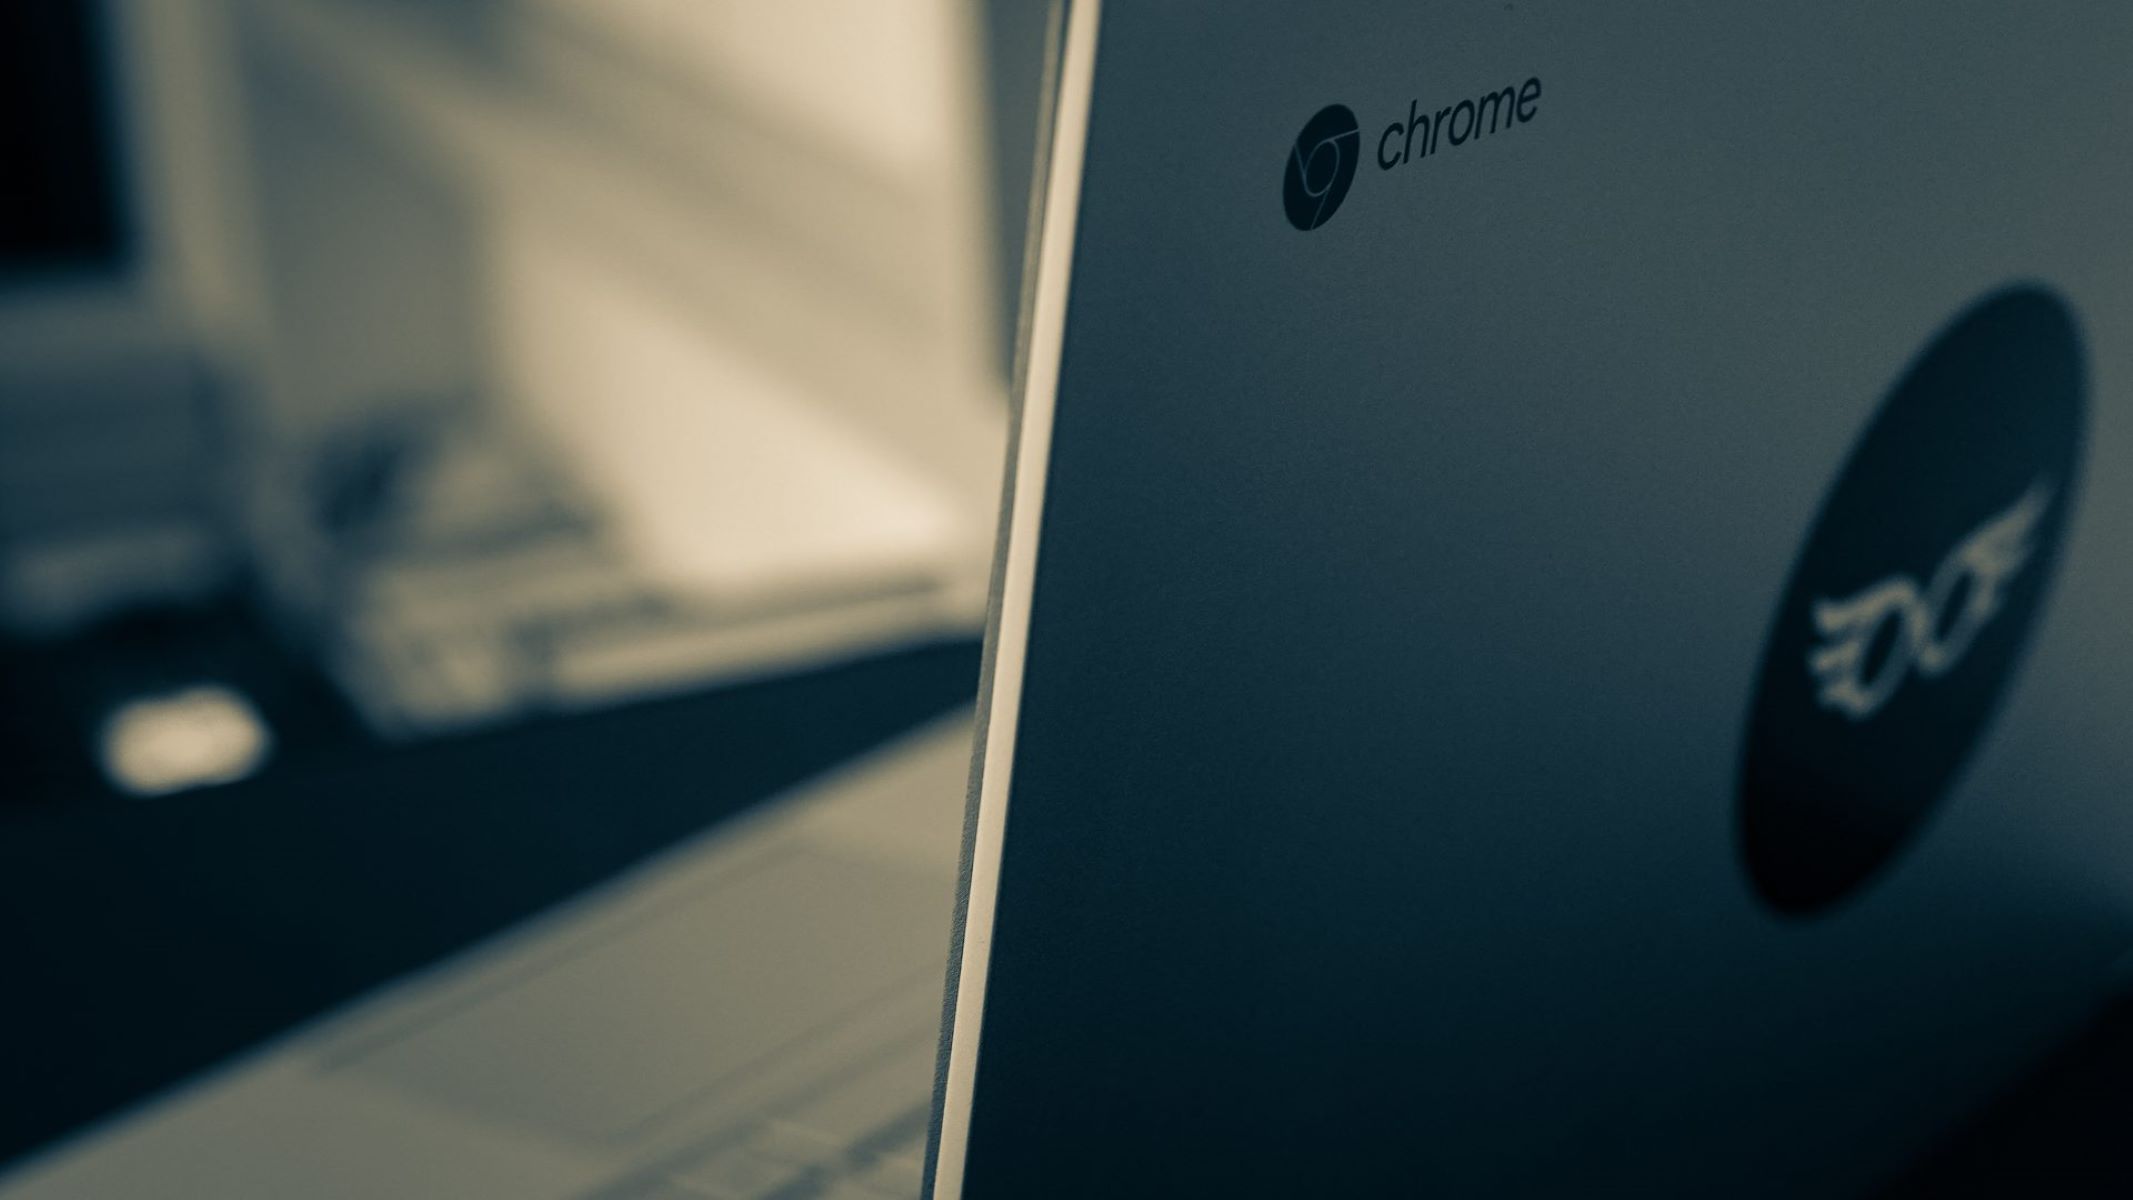 How To Disable Firewall On Chromebook